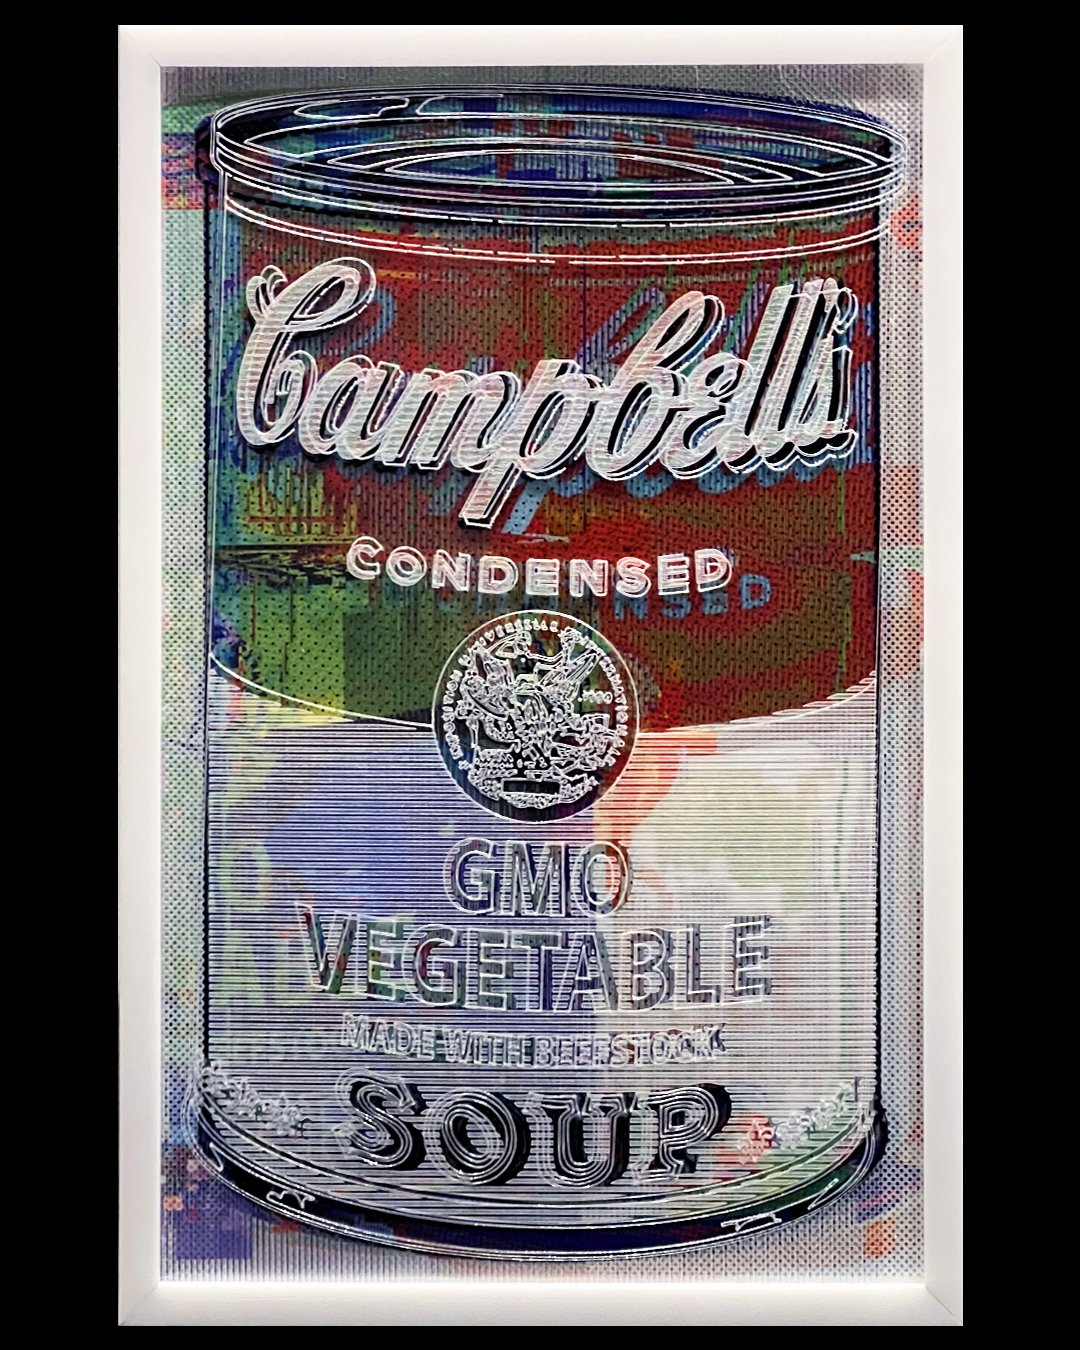    OMG-GMO  , 22” x 14”, sublimation print, printed transparency and etched plexiglass 